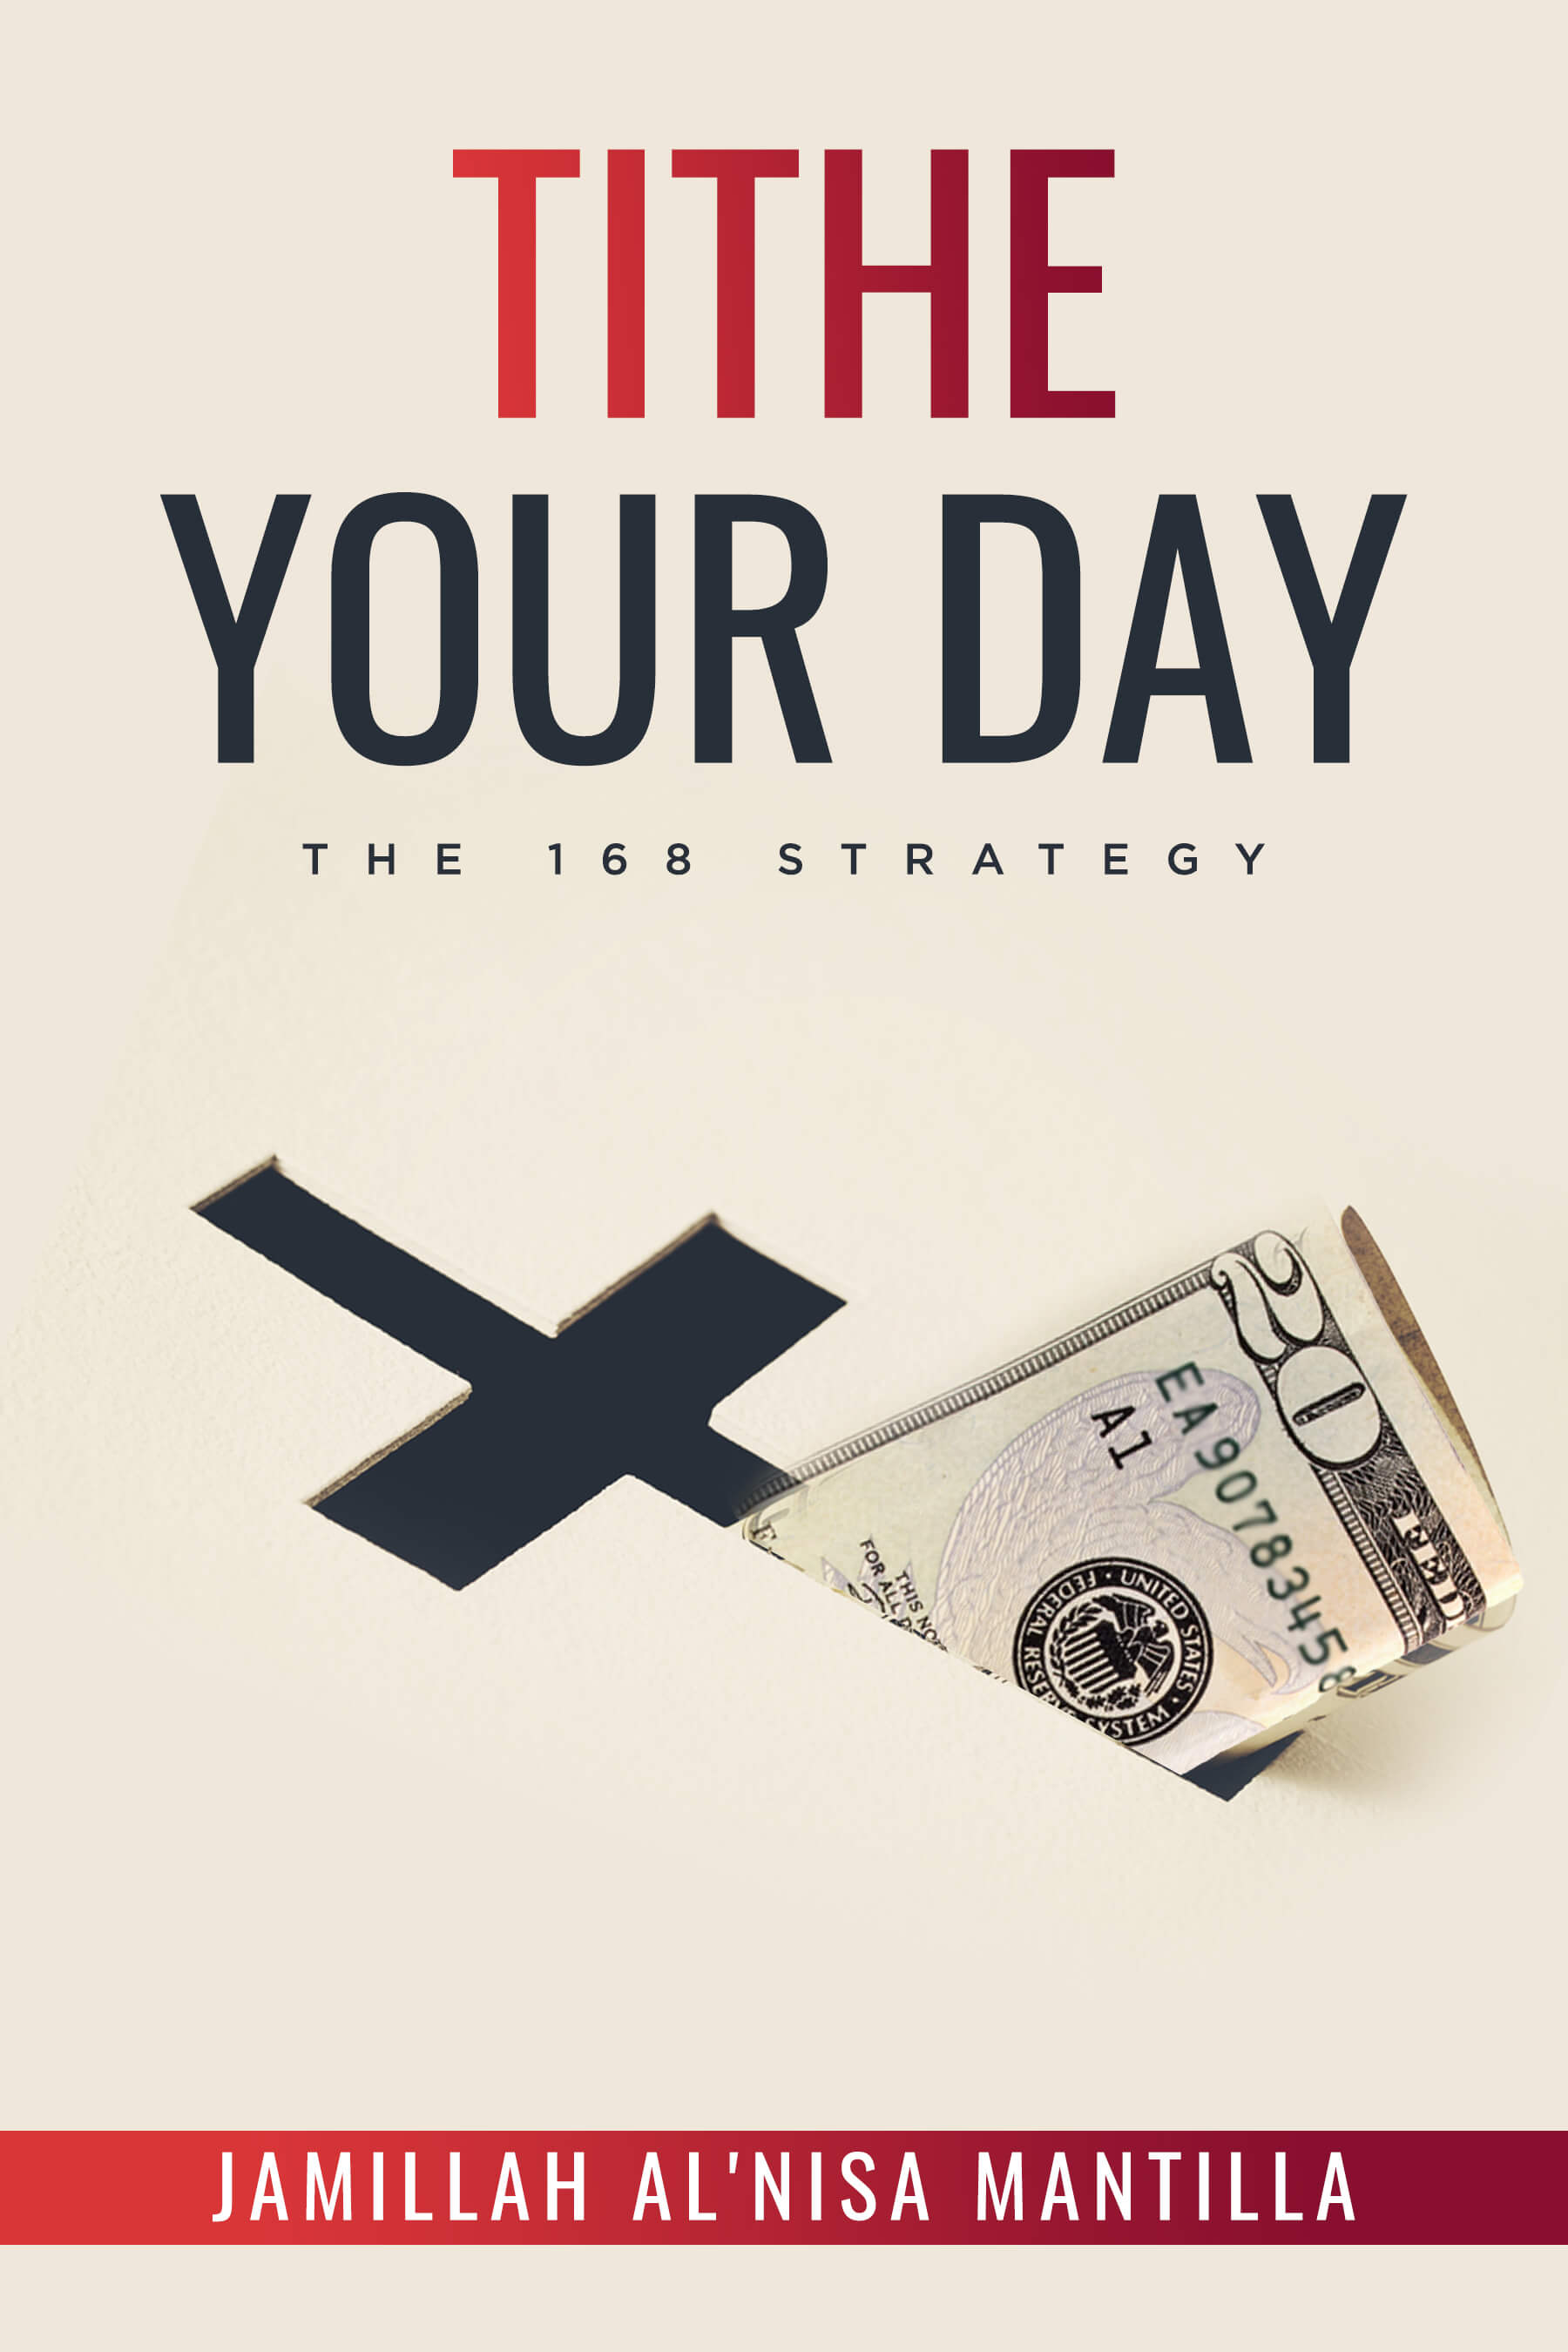 Tithe your day